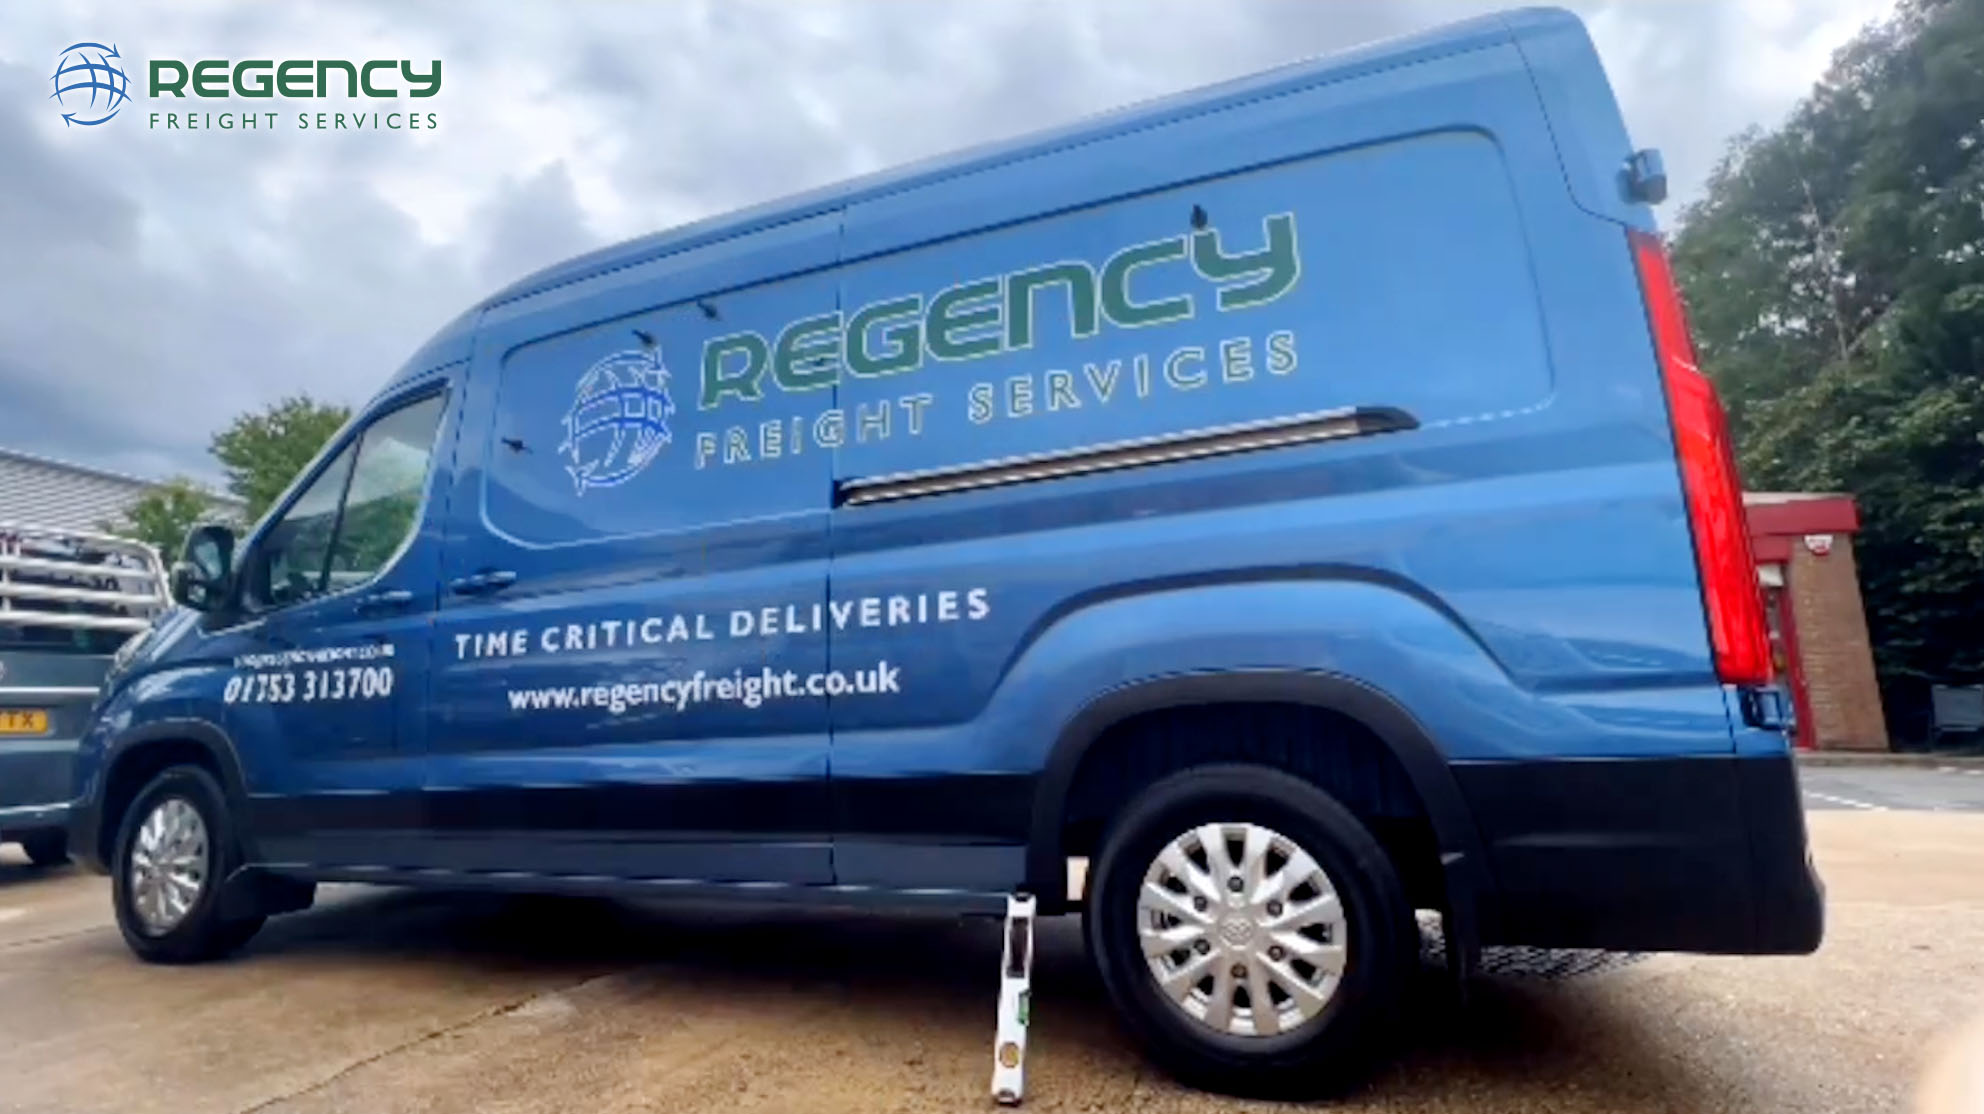 Regency Freight a leading transportation and logistics company proudly announces the expansion of its fleet